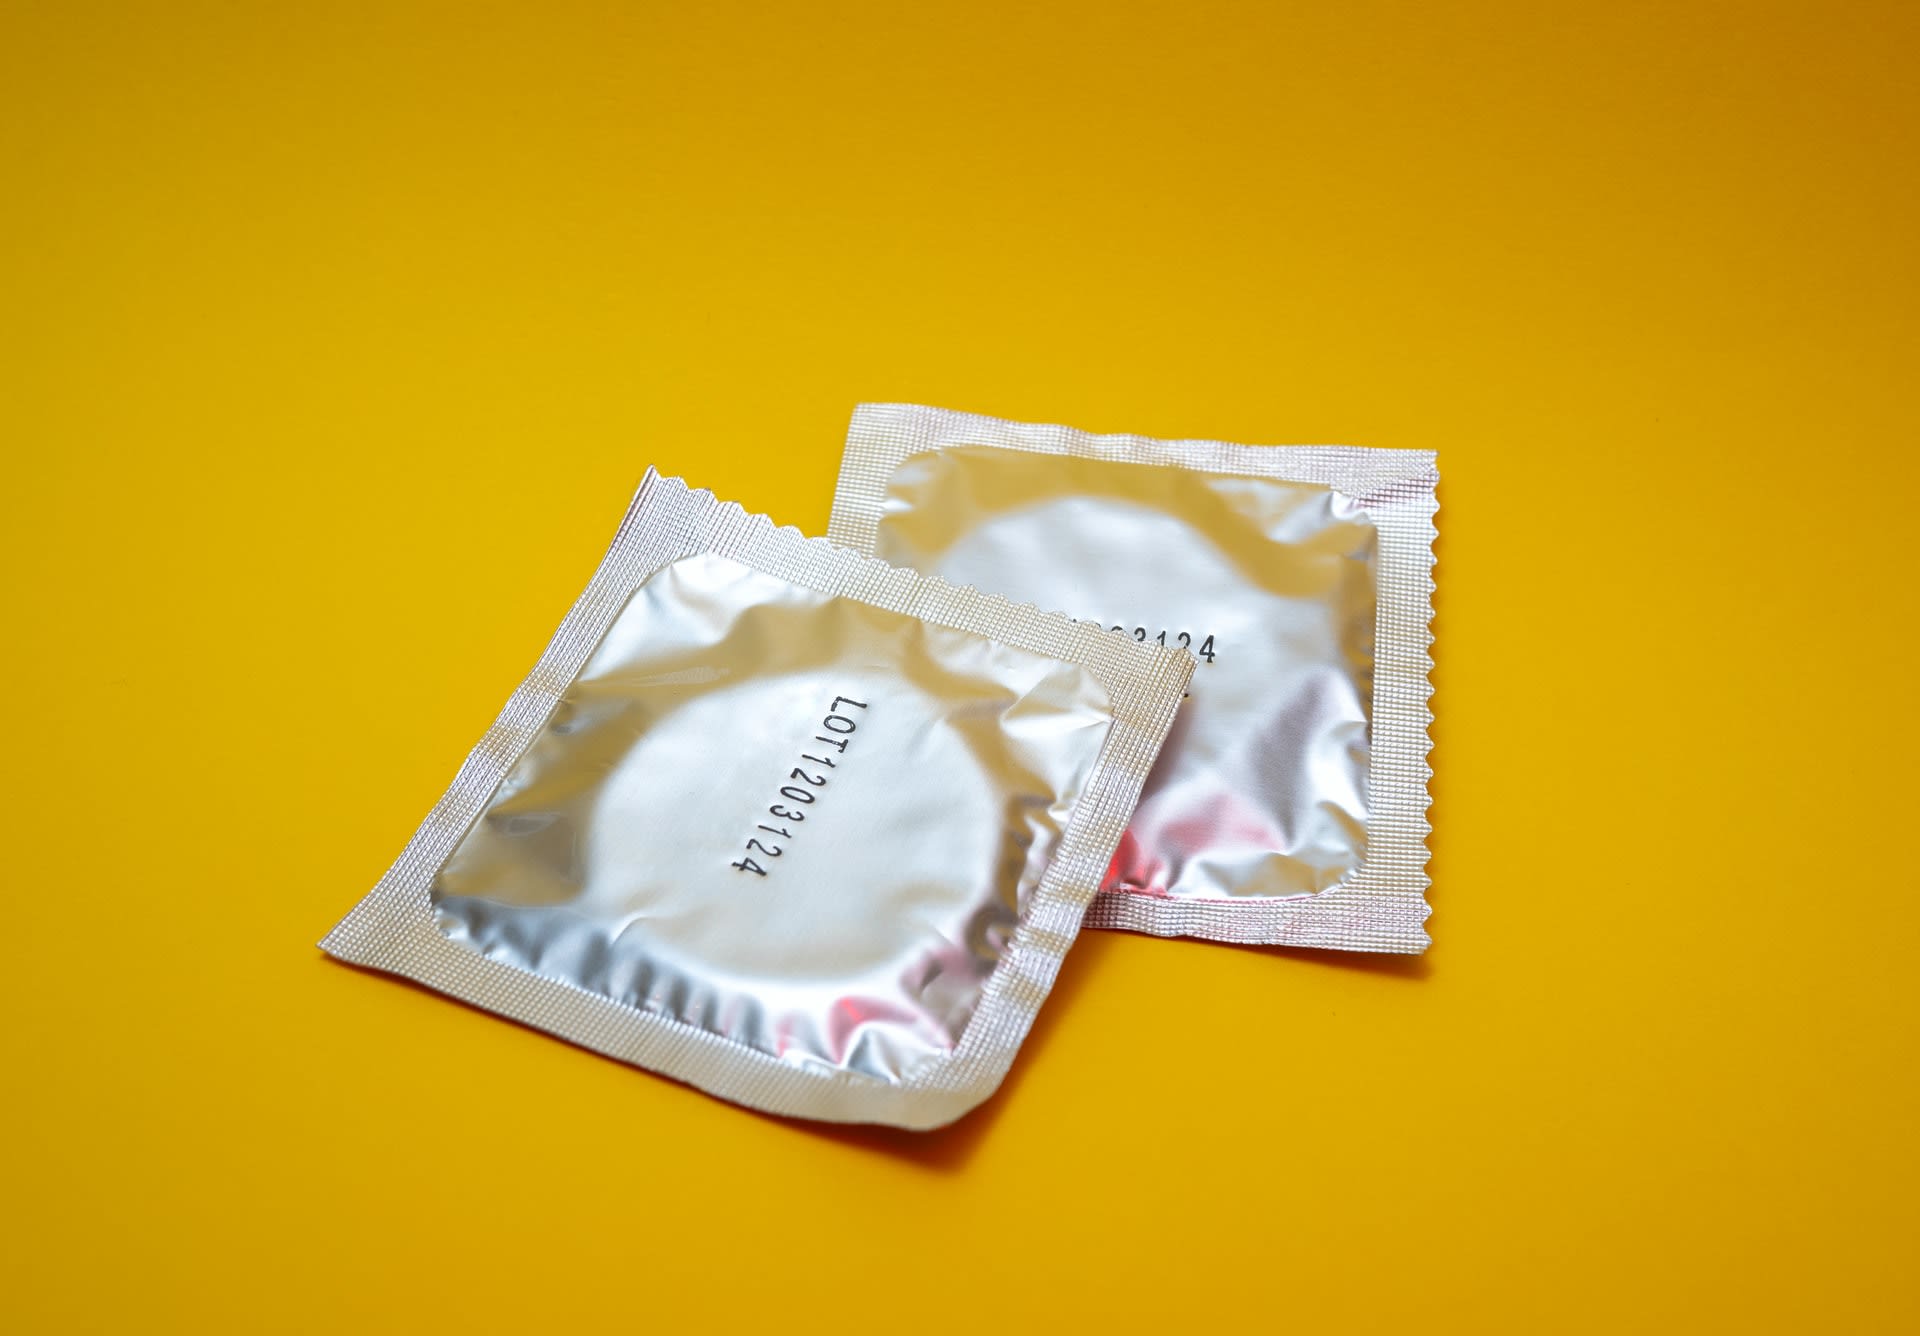 Russians stocking up condoms over fears of price increase, supply shortage brought about by sanctions